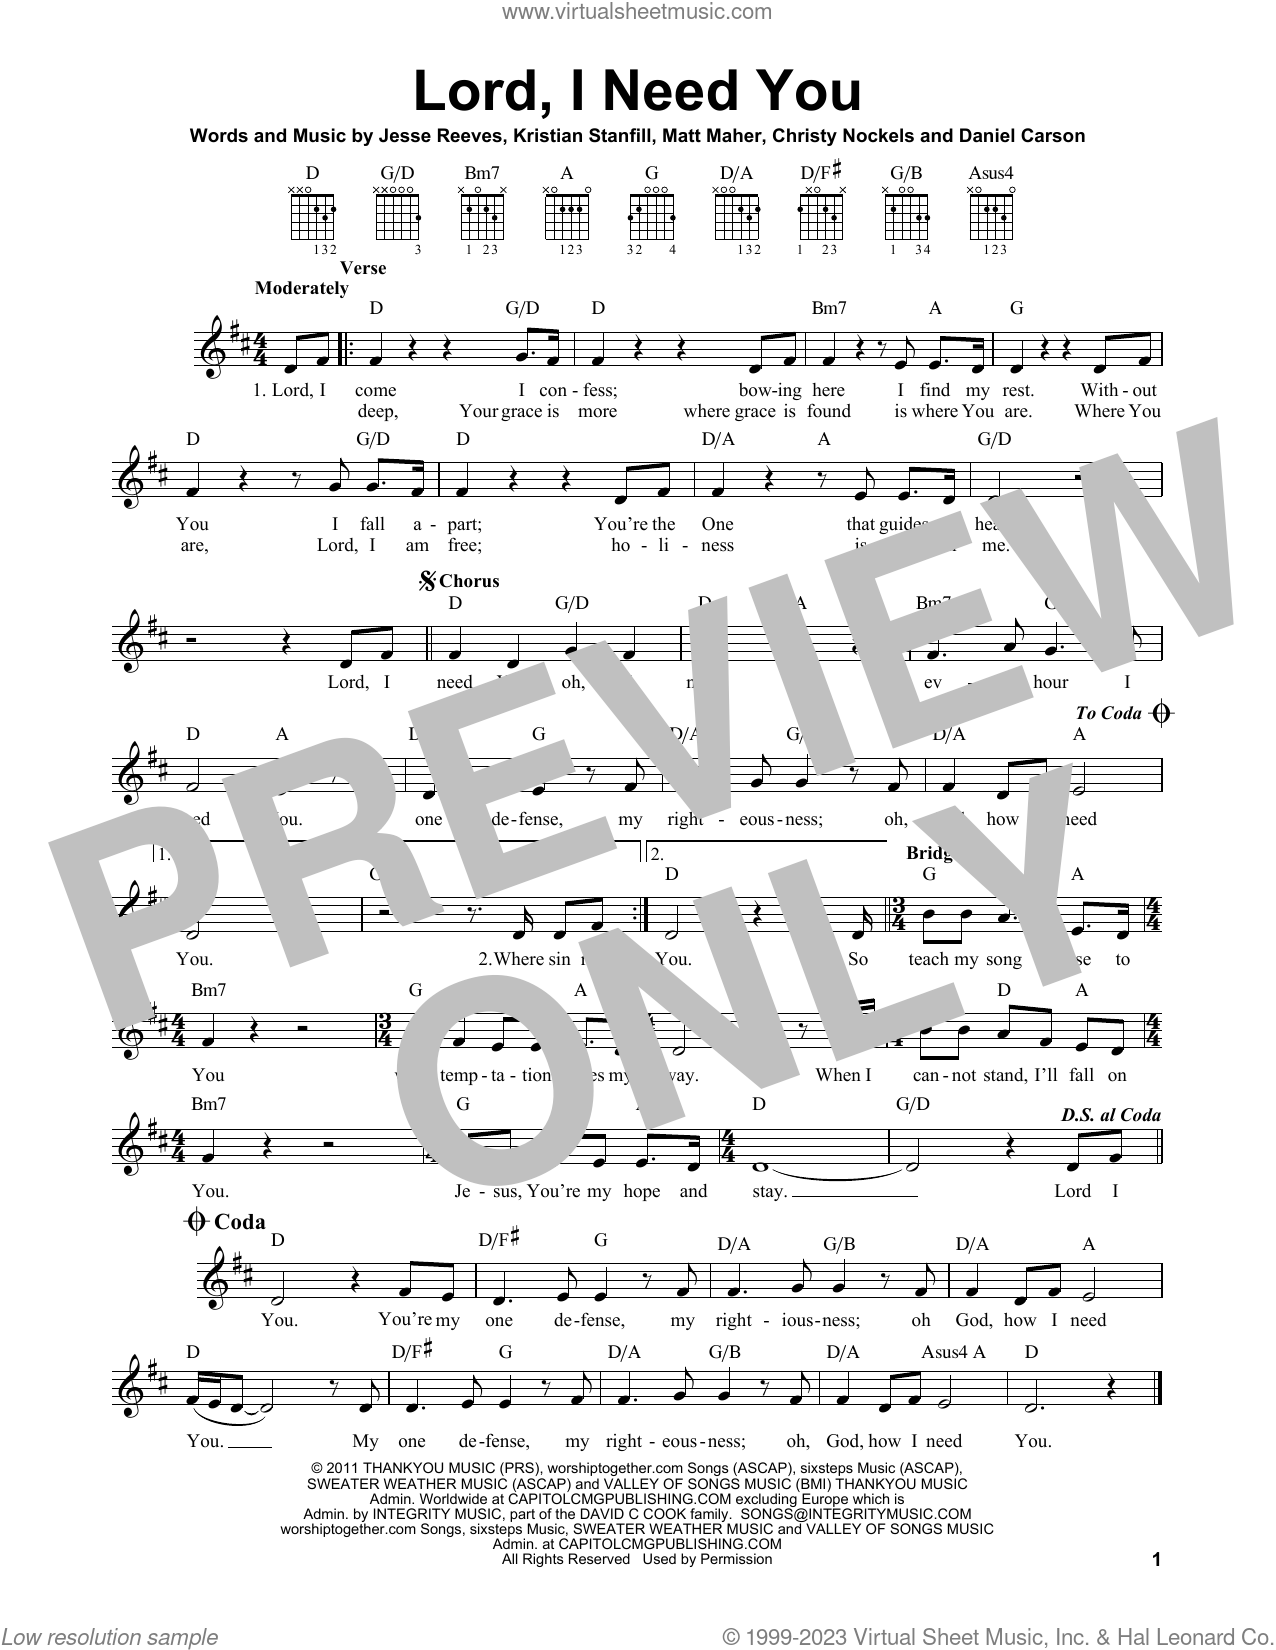 Sweater Weather - C Instrument Sheet Music to download and print